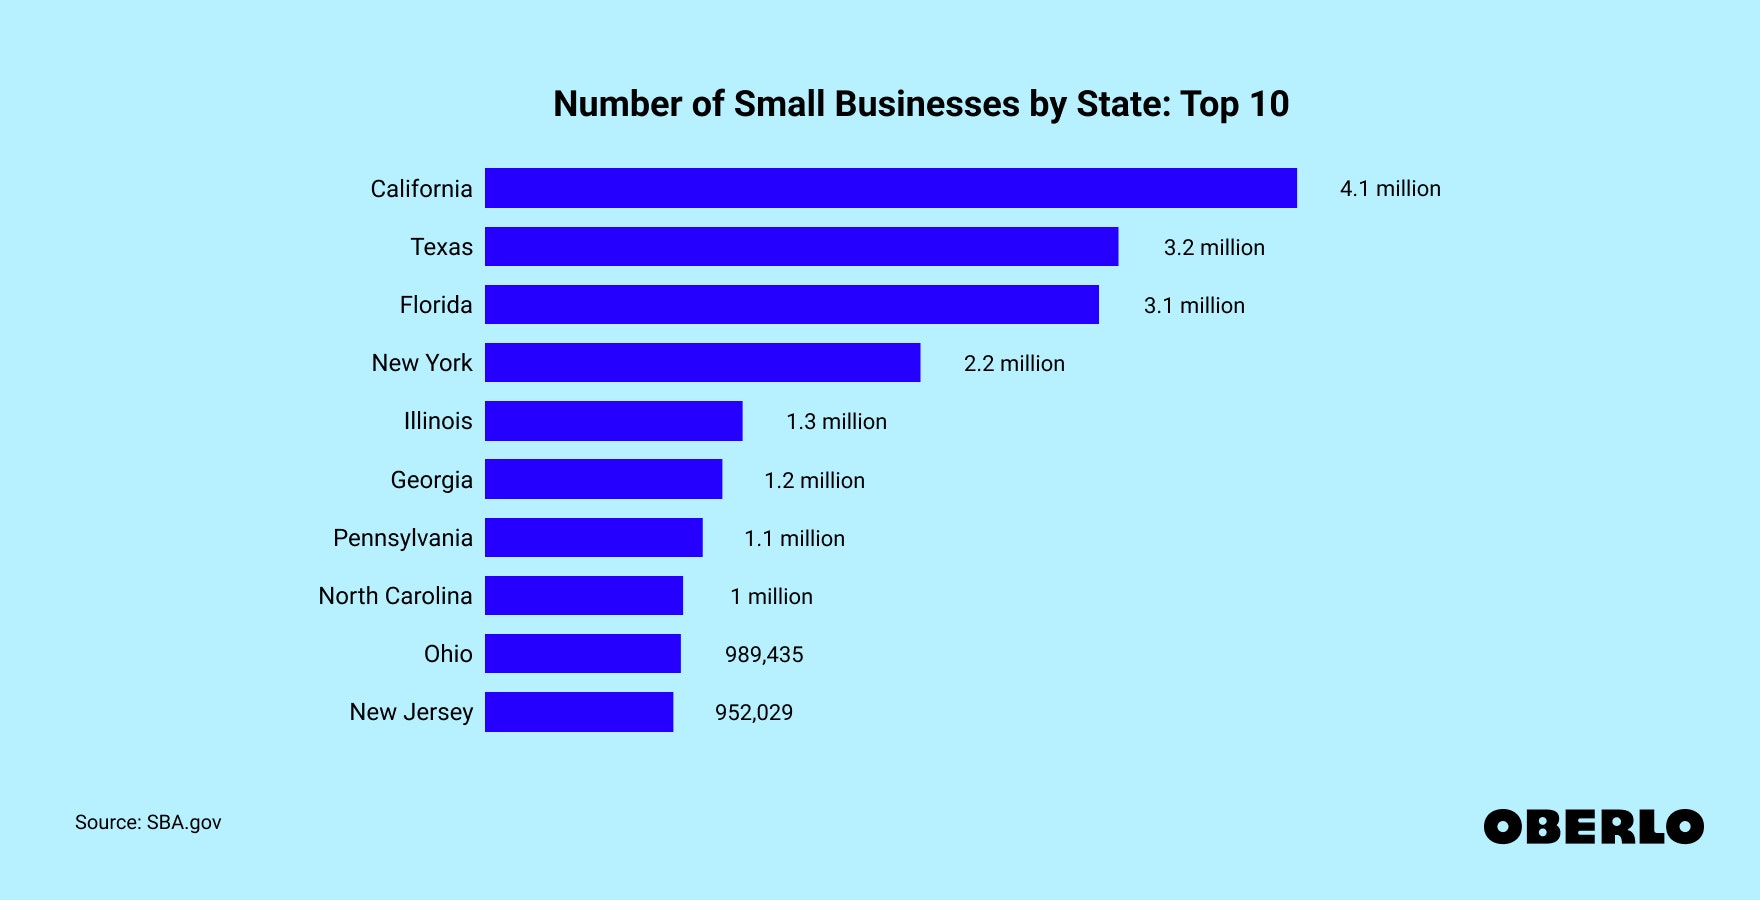 Chart showing the Number of small businesses by state: top 10